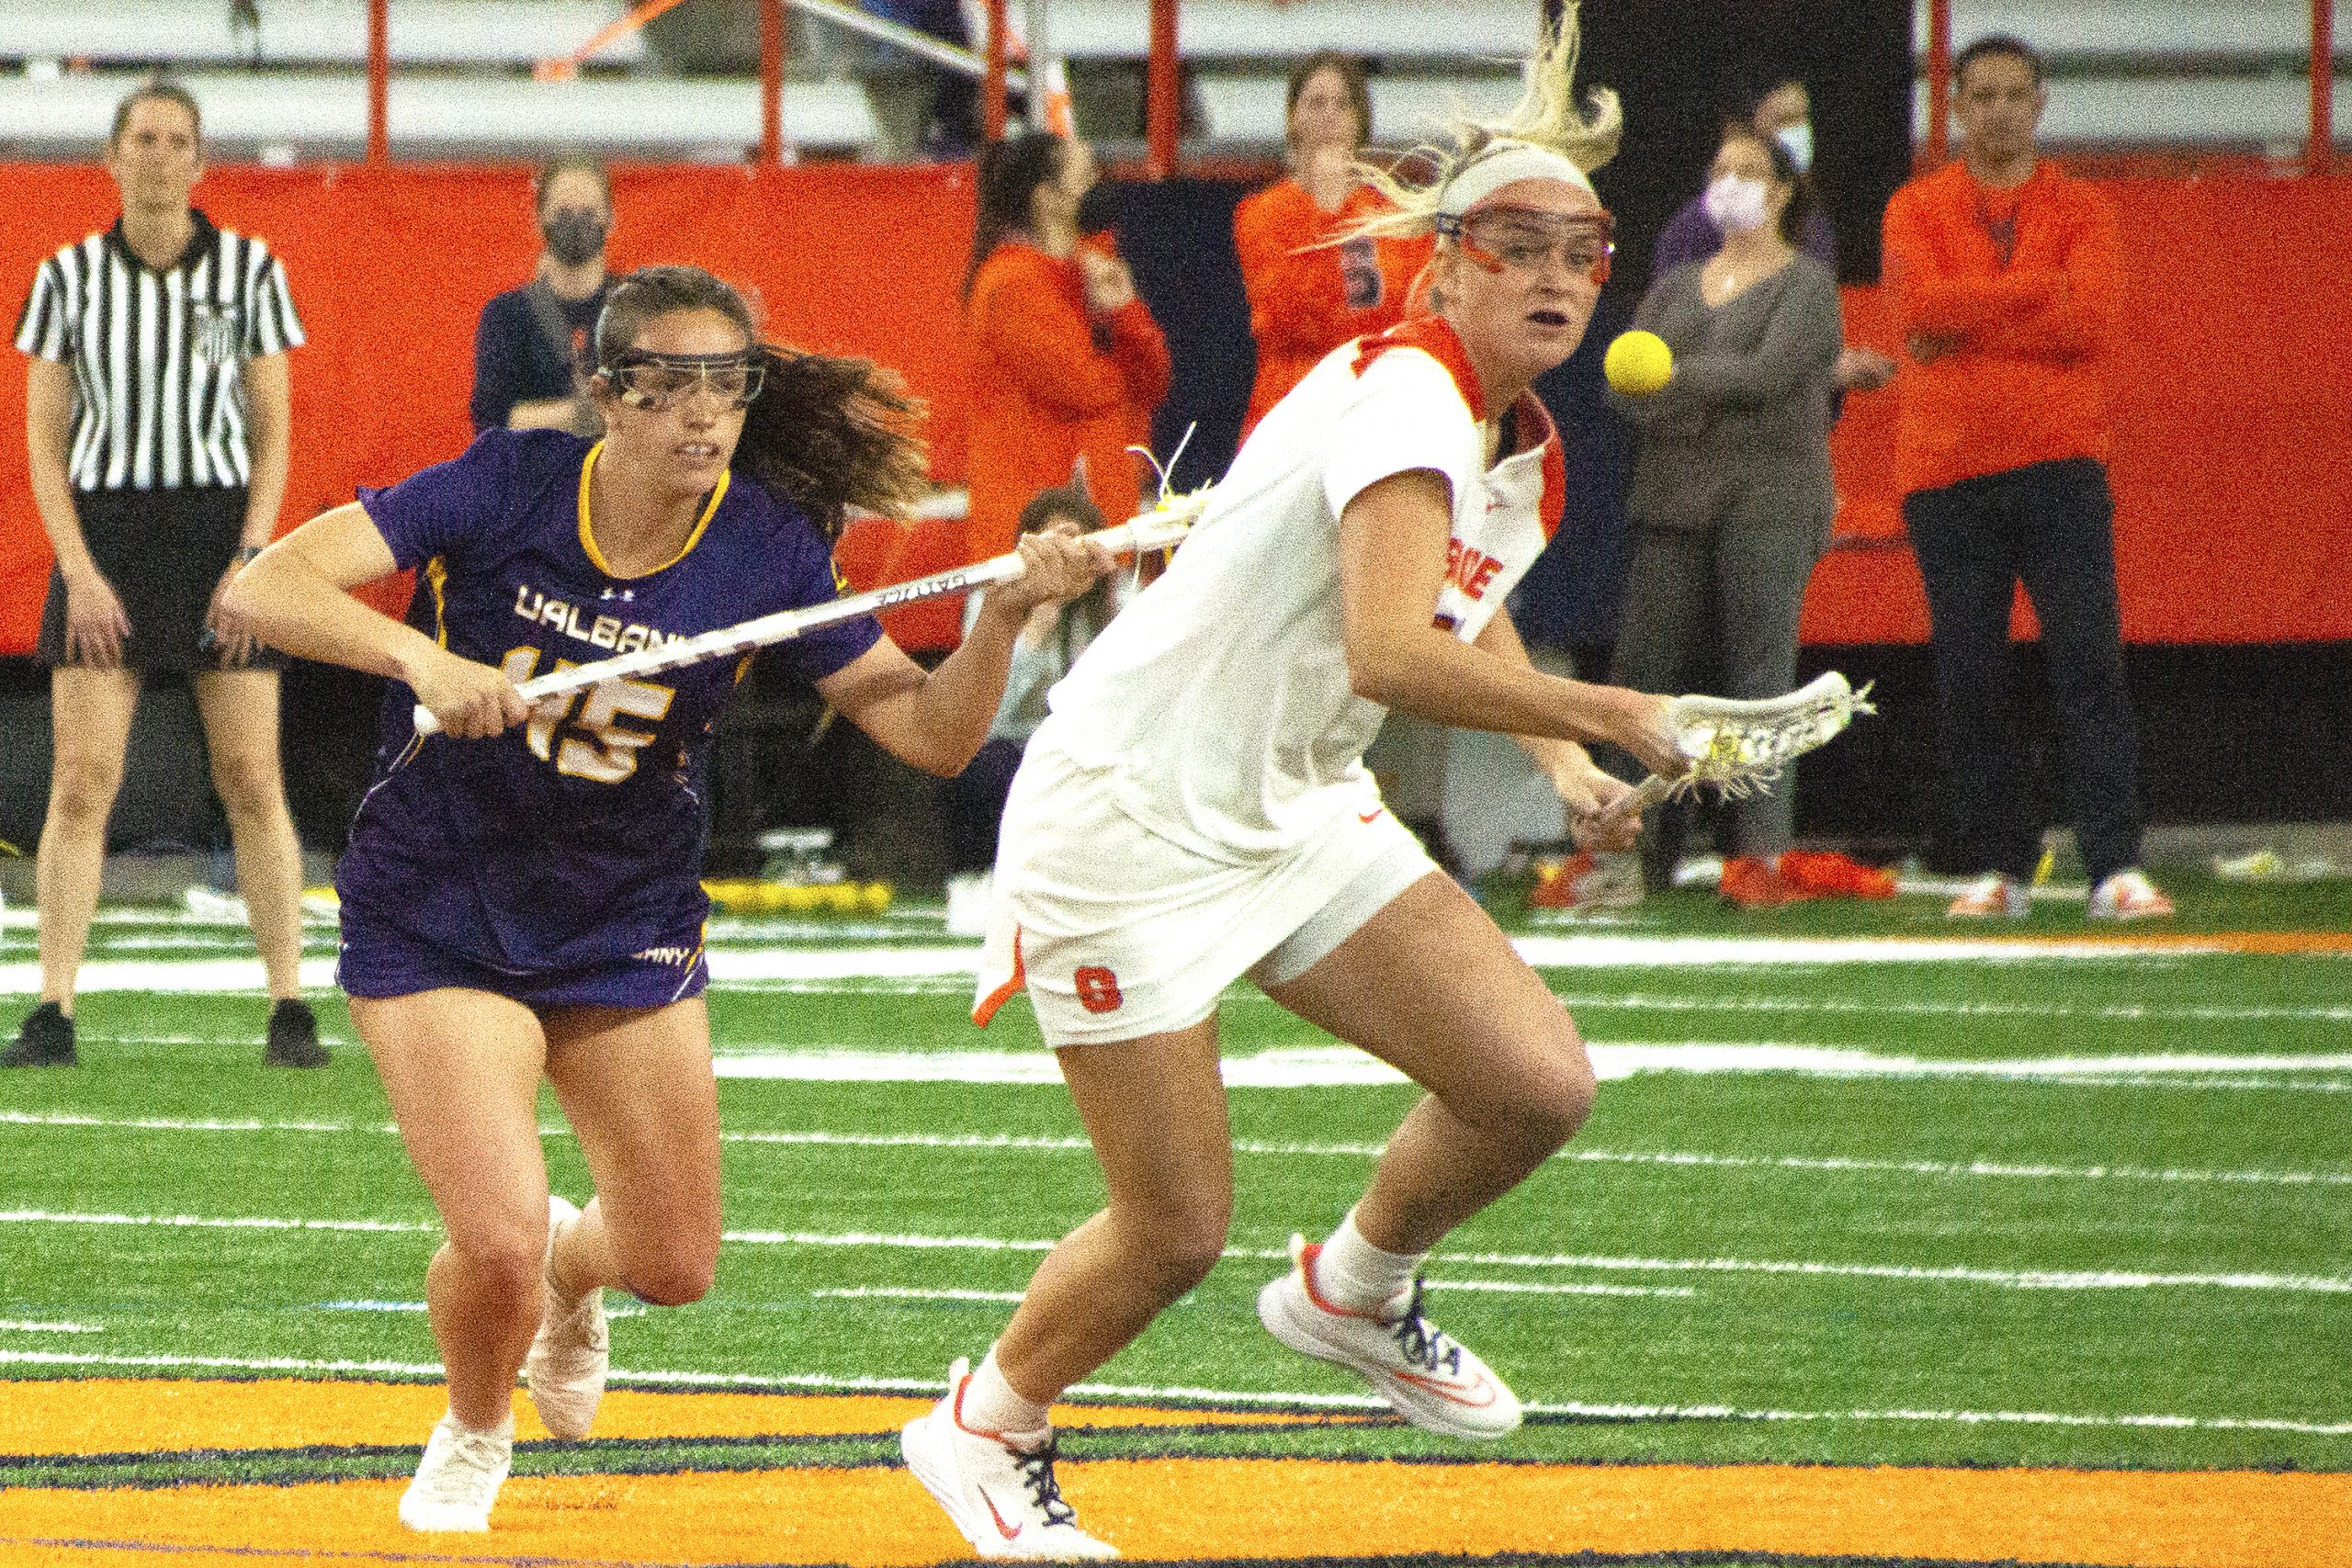 Number 8# takes off against UAlbany during the Women's Lacrosse game in the Dome at Syracuse University at Syrause, New York on April 19, 2022. (Photo by Nicole Funes)